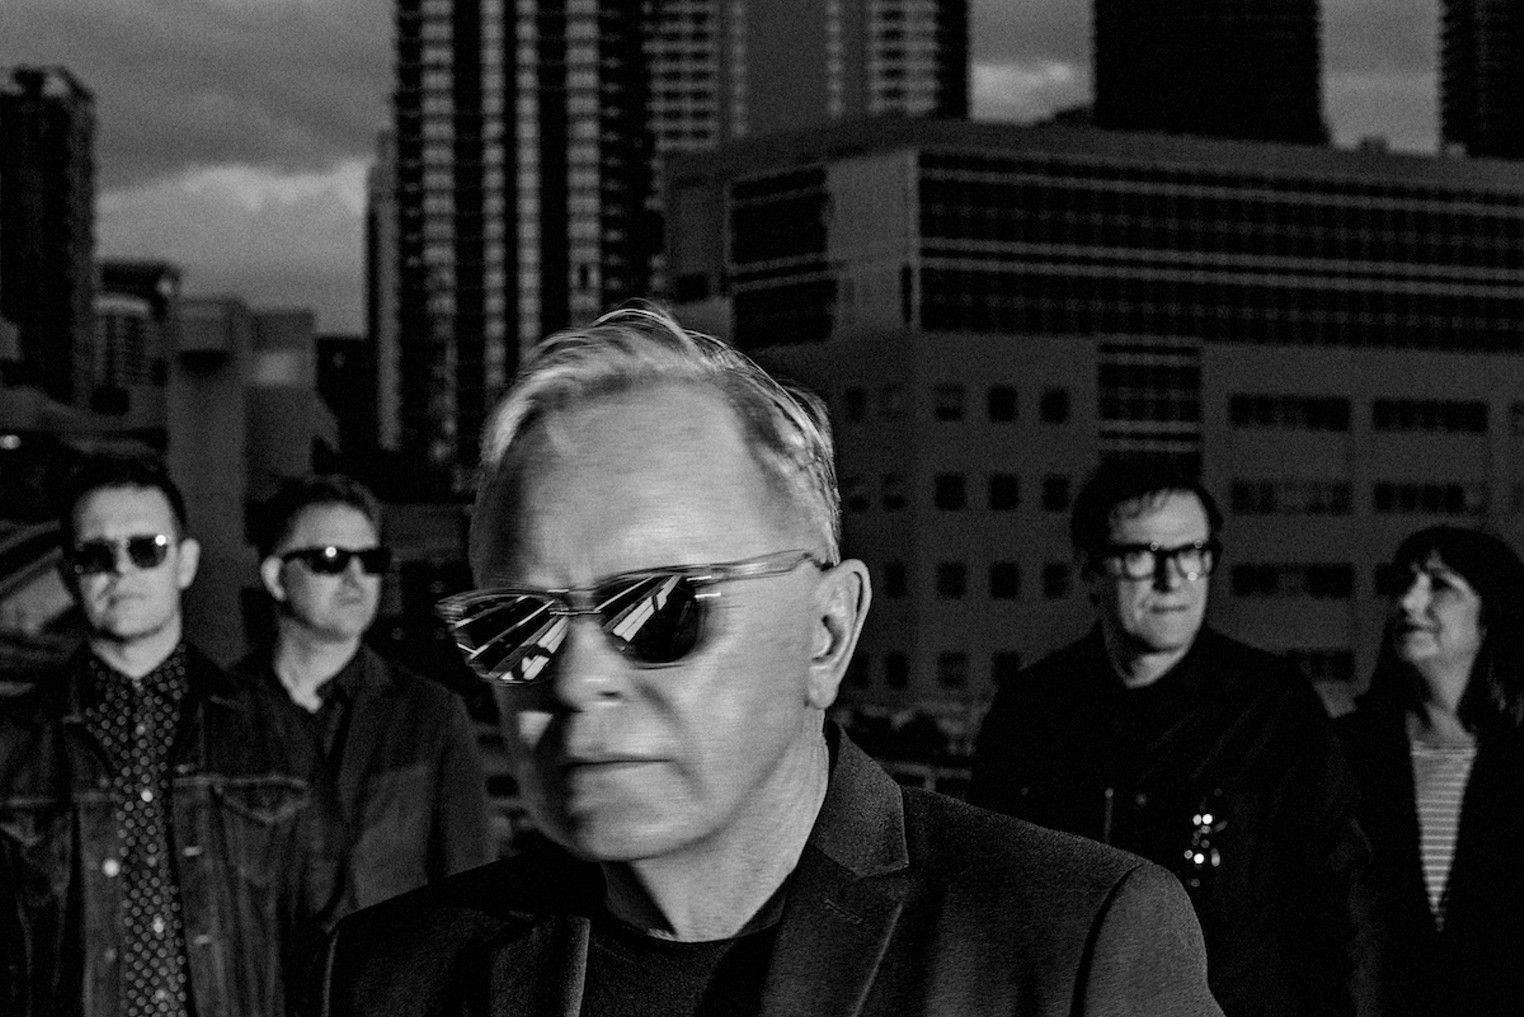 Have you new order. New order вокалист. Группа New order 1980s. New order 2007. New order 1984.